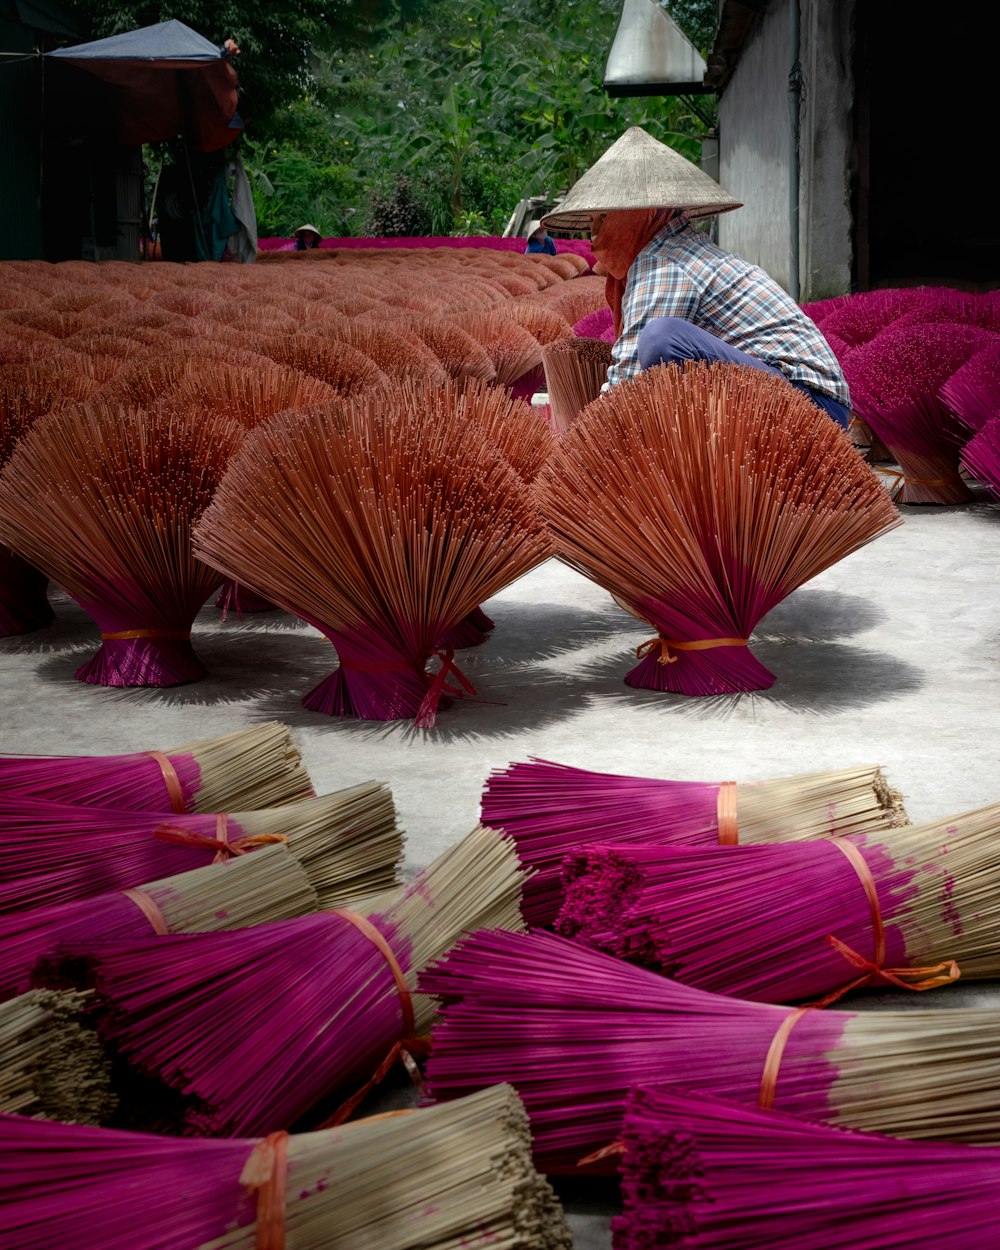 a man sitting on the ground next to a pile of purple umbrellas